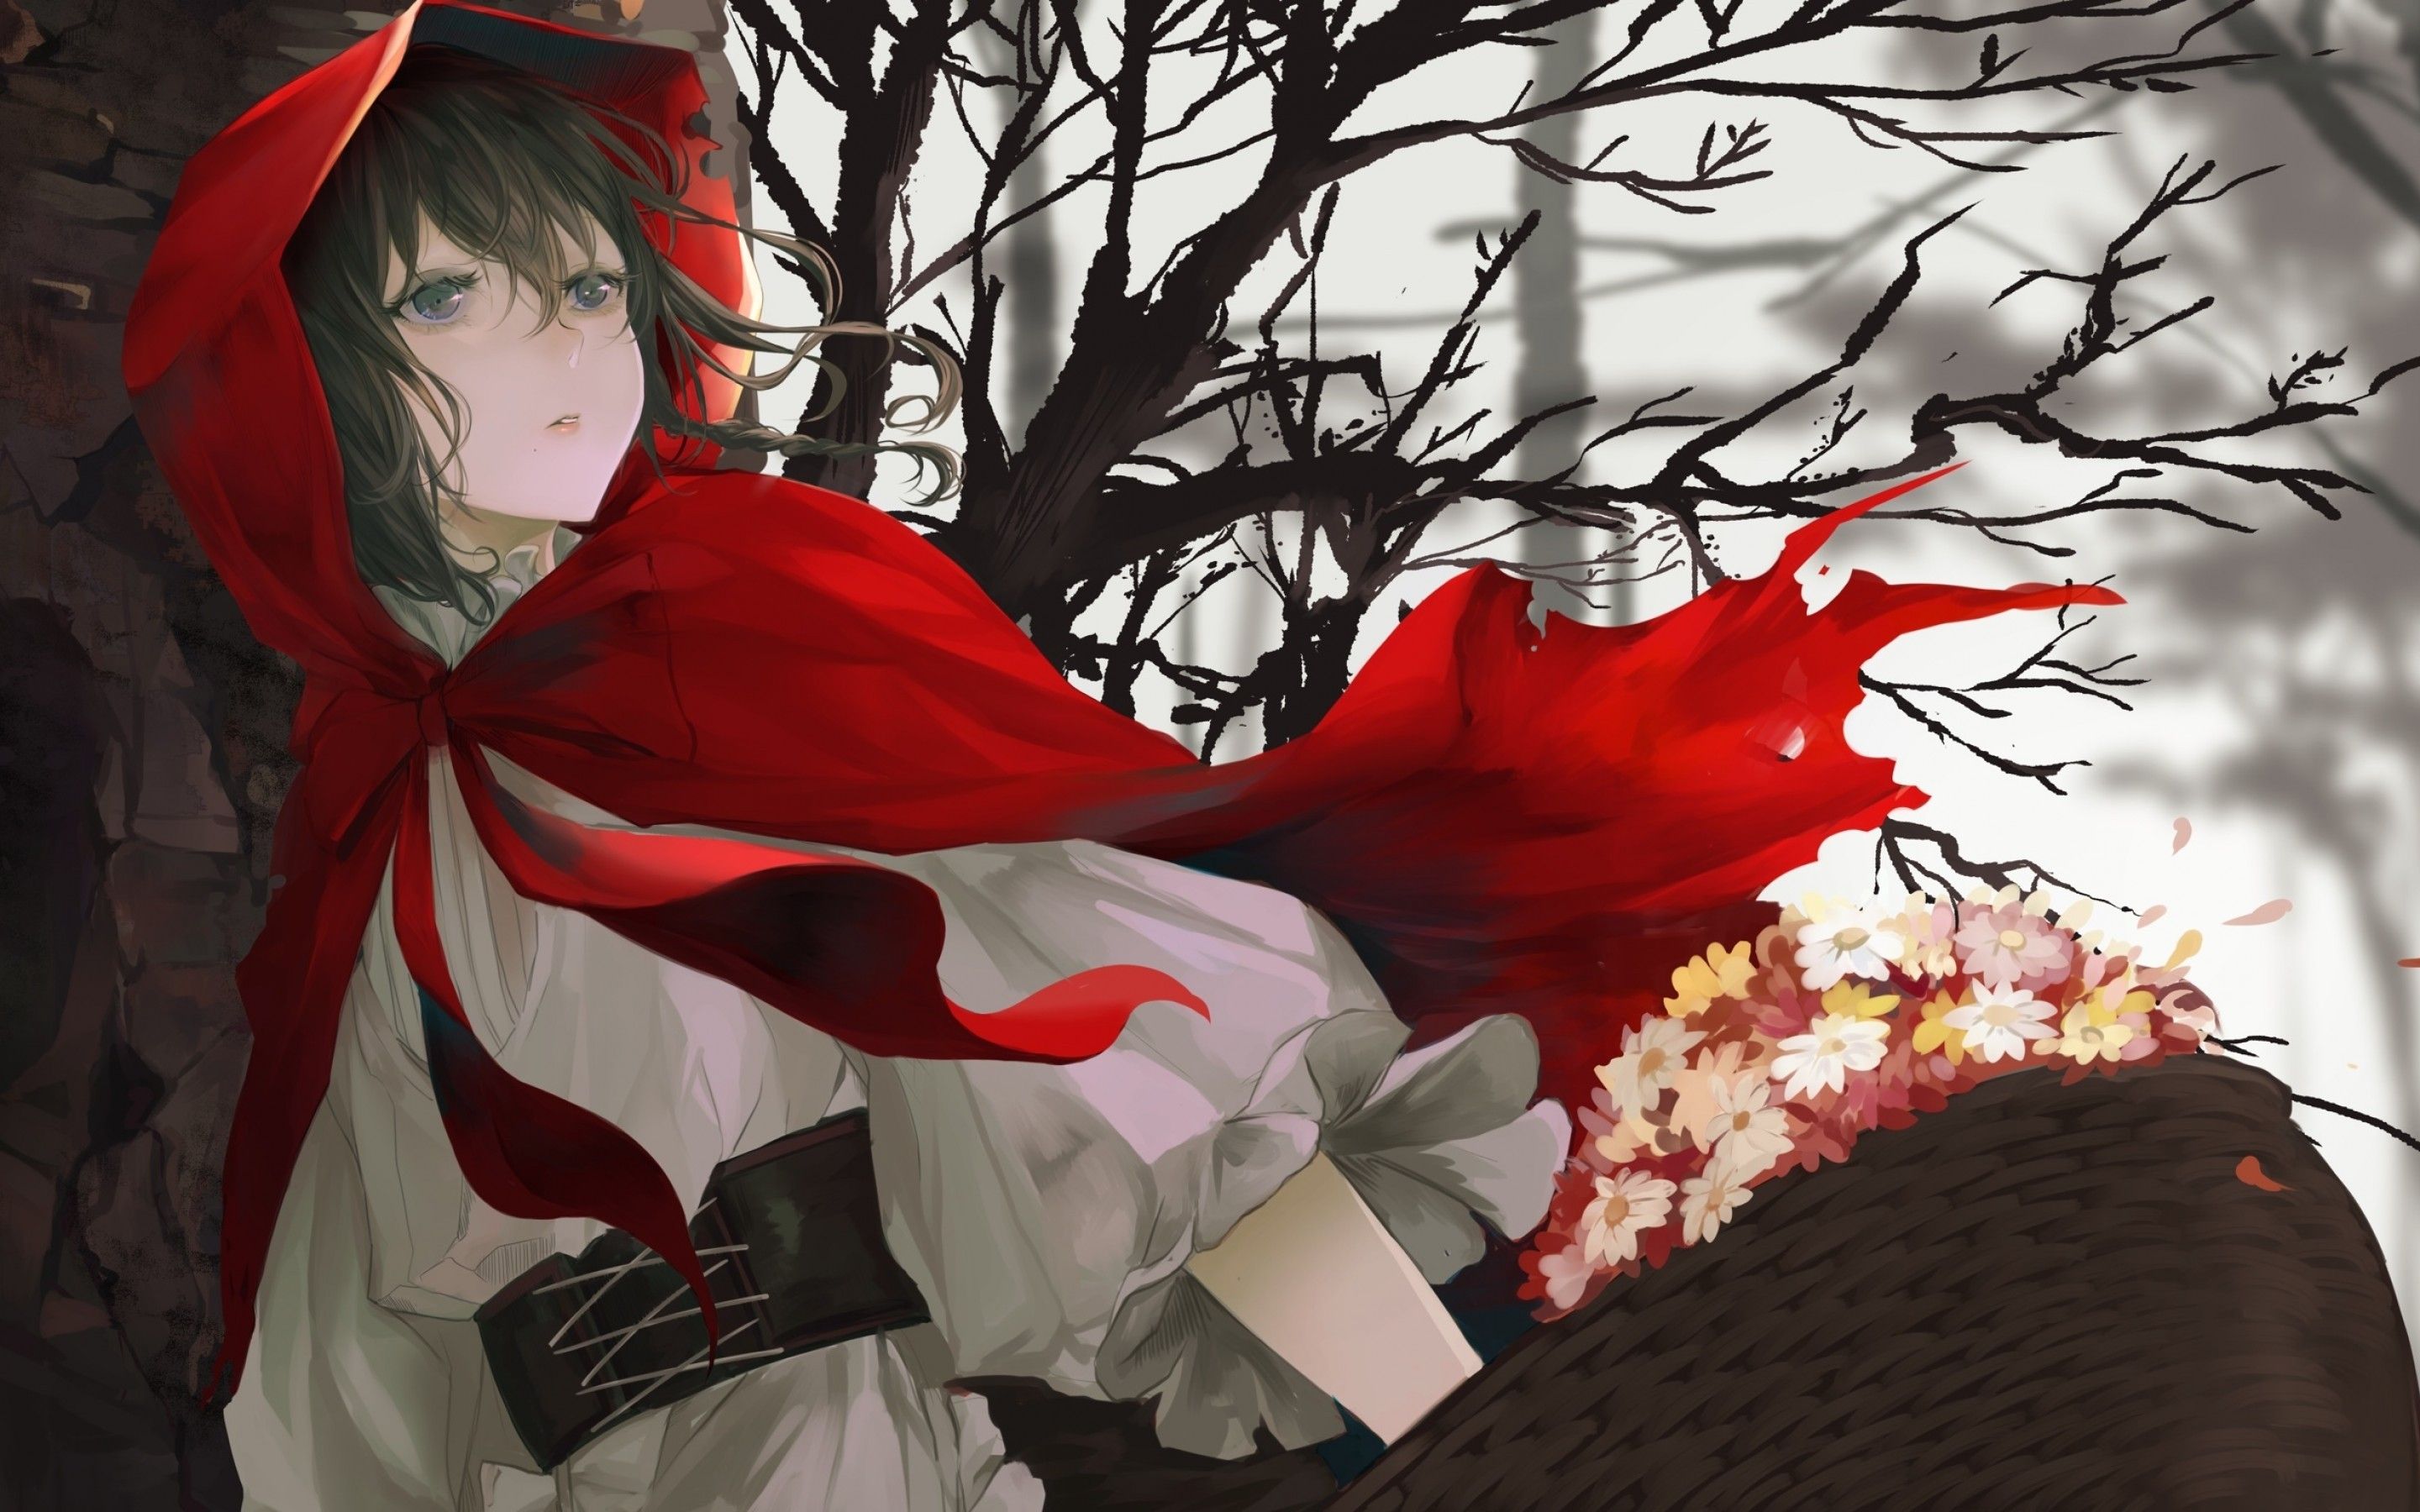 Download 2880x1800 Little Red Riding Hood, Anime Girl, Flowers